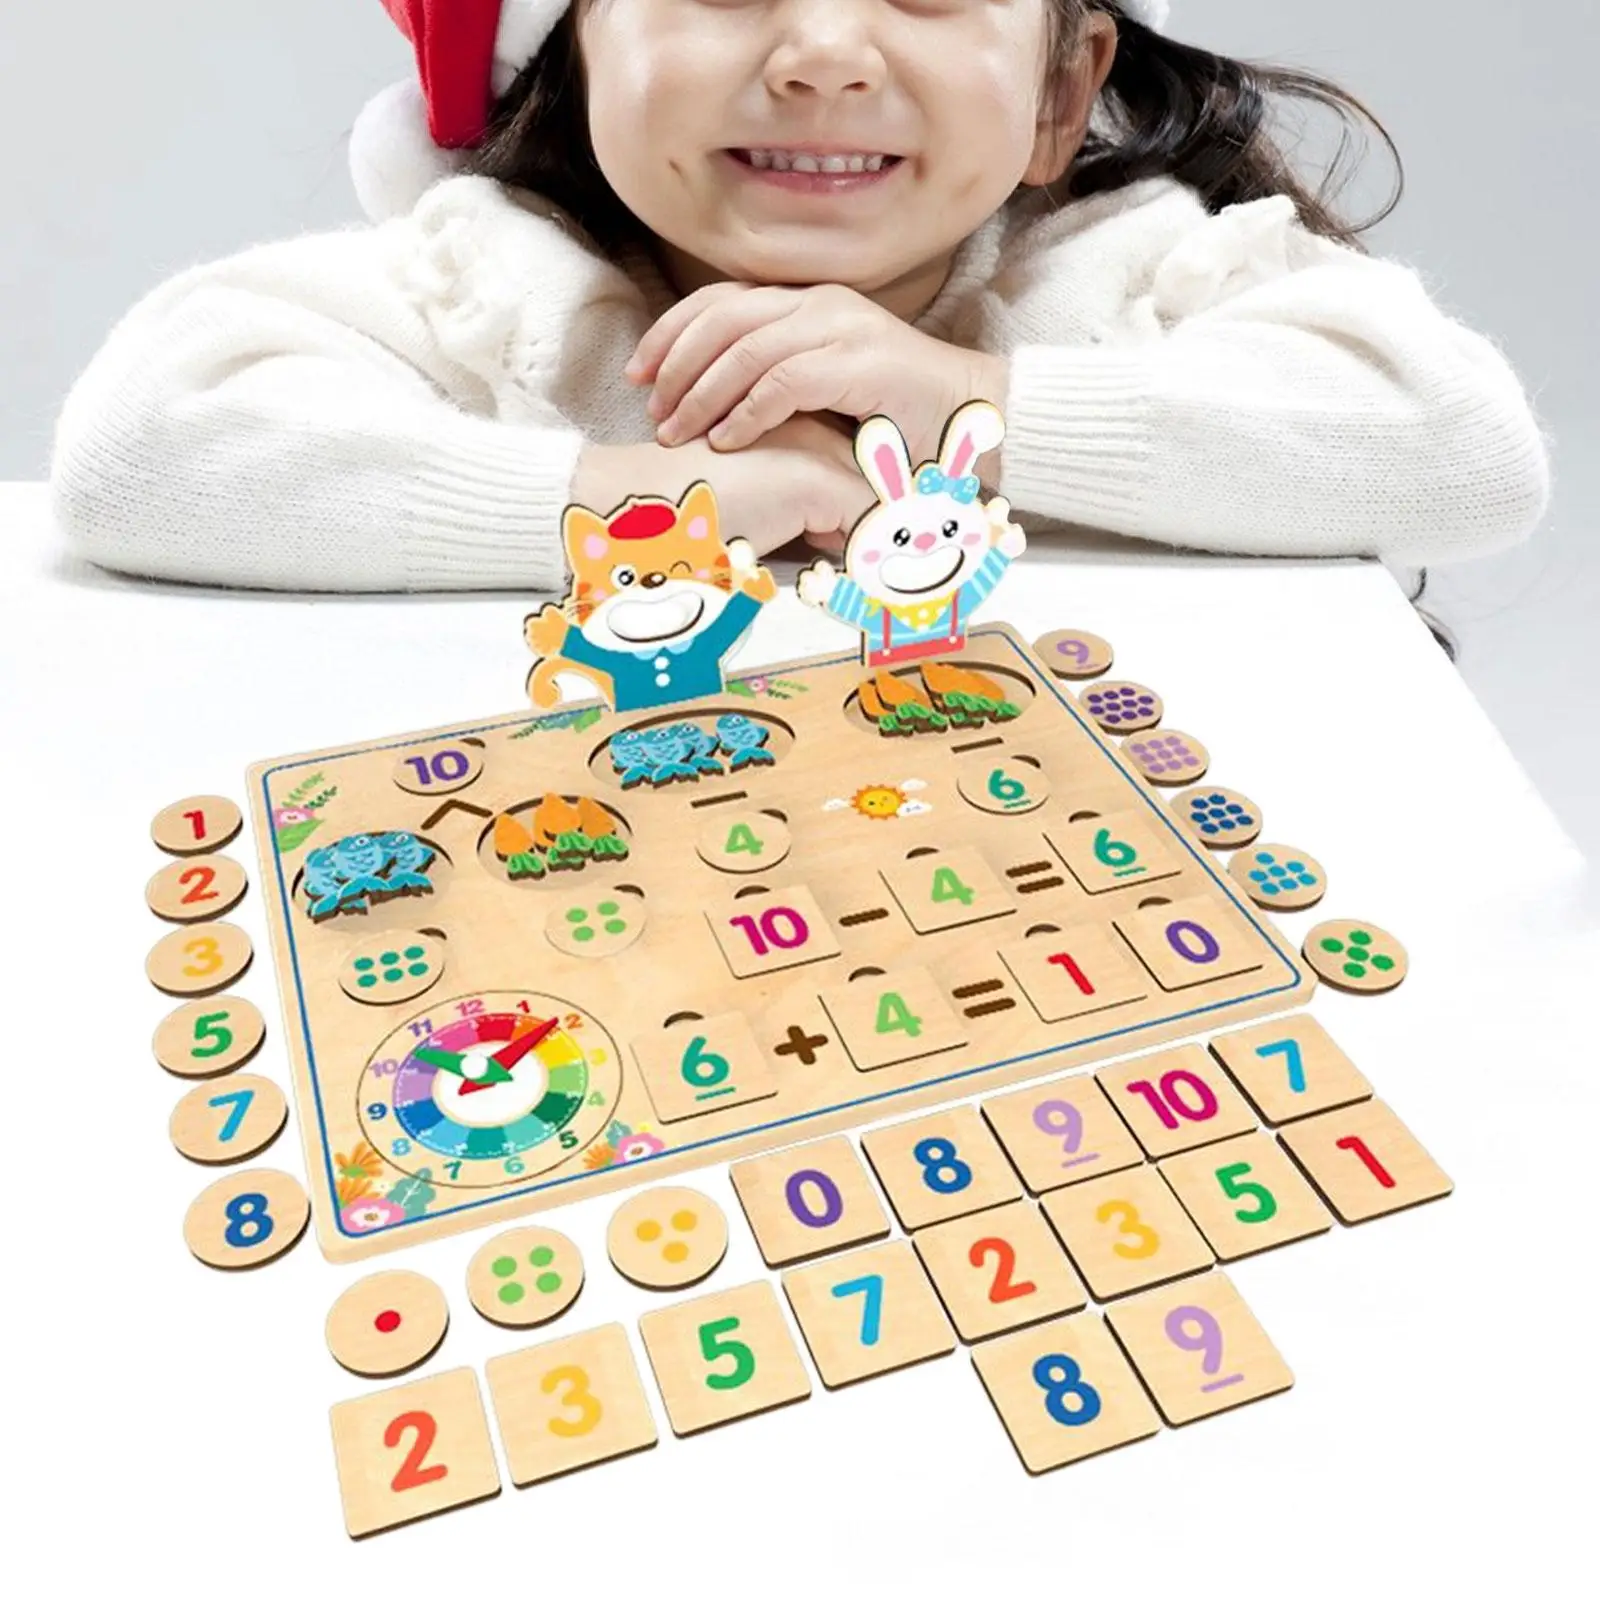 Preschool Wood Mathematical Learning Toy Calculation Board Made Premium Material Accessory Festival Gift Professional Durable